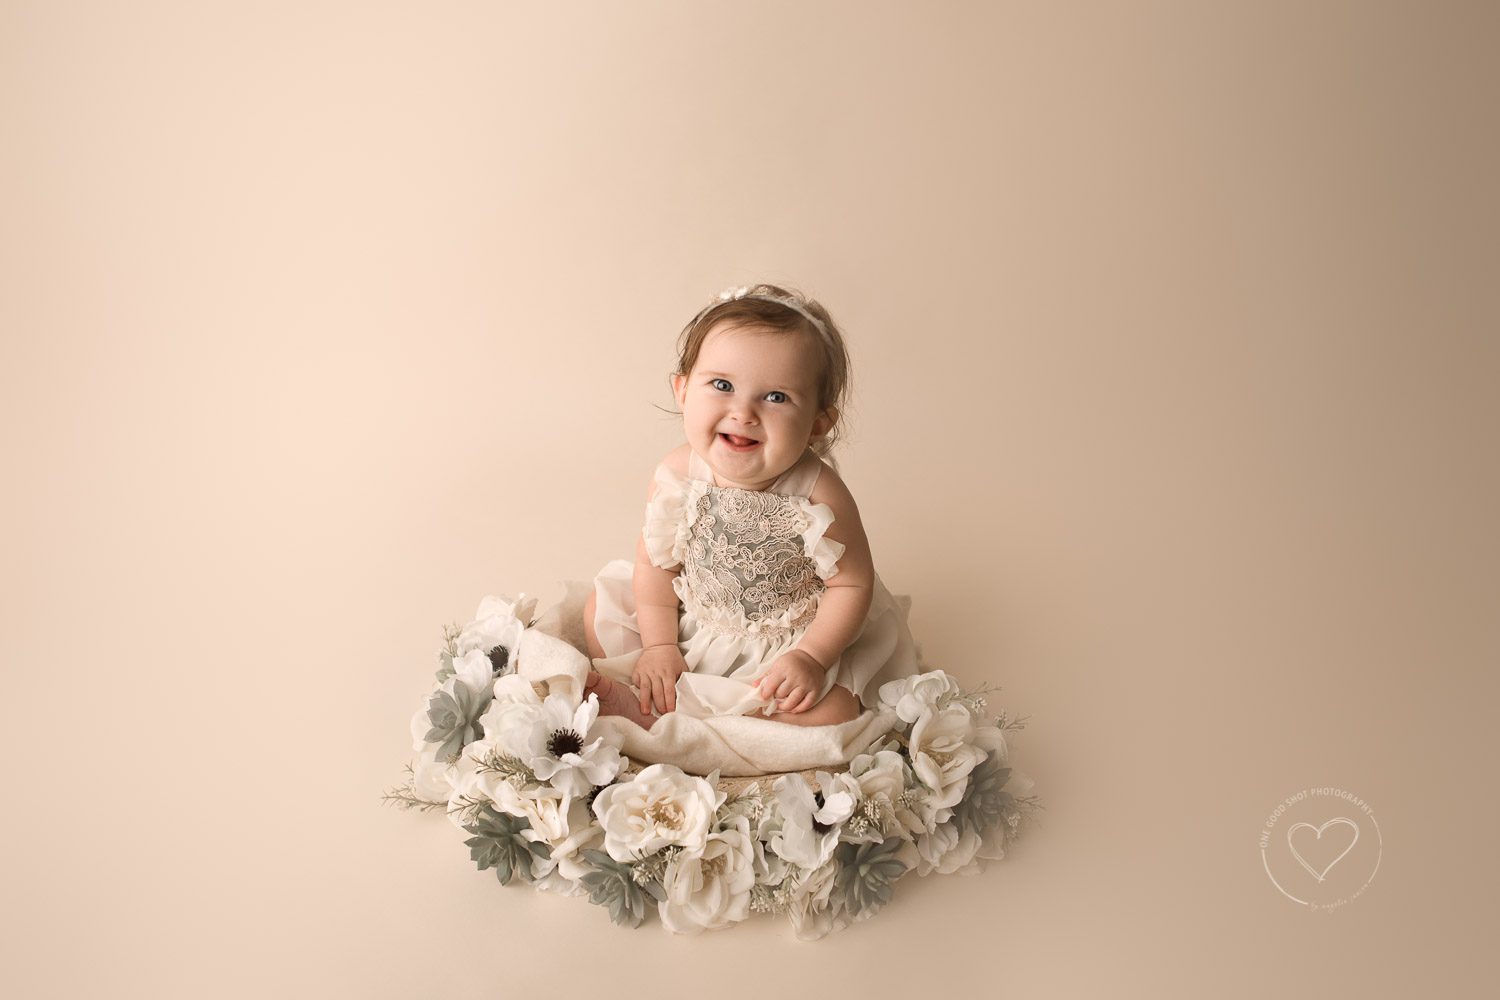 baby girl sitting in bowl with flowers, smiling at camera, 6 month old, milestone session, fresno, clovis, photographer, one good shot photography